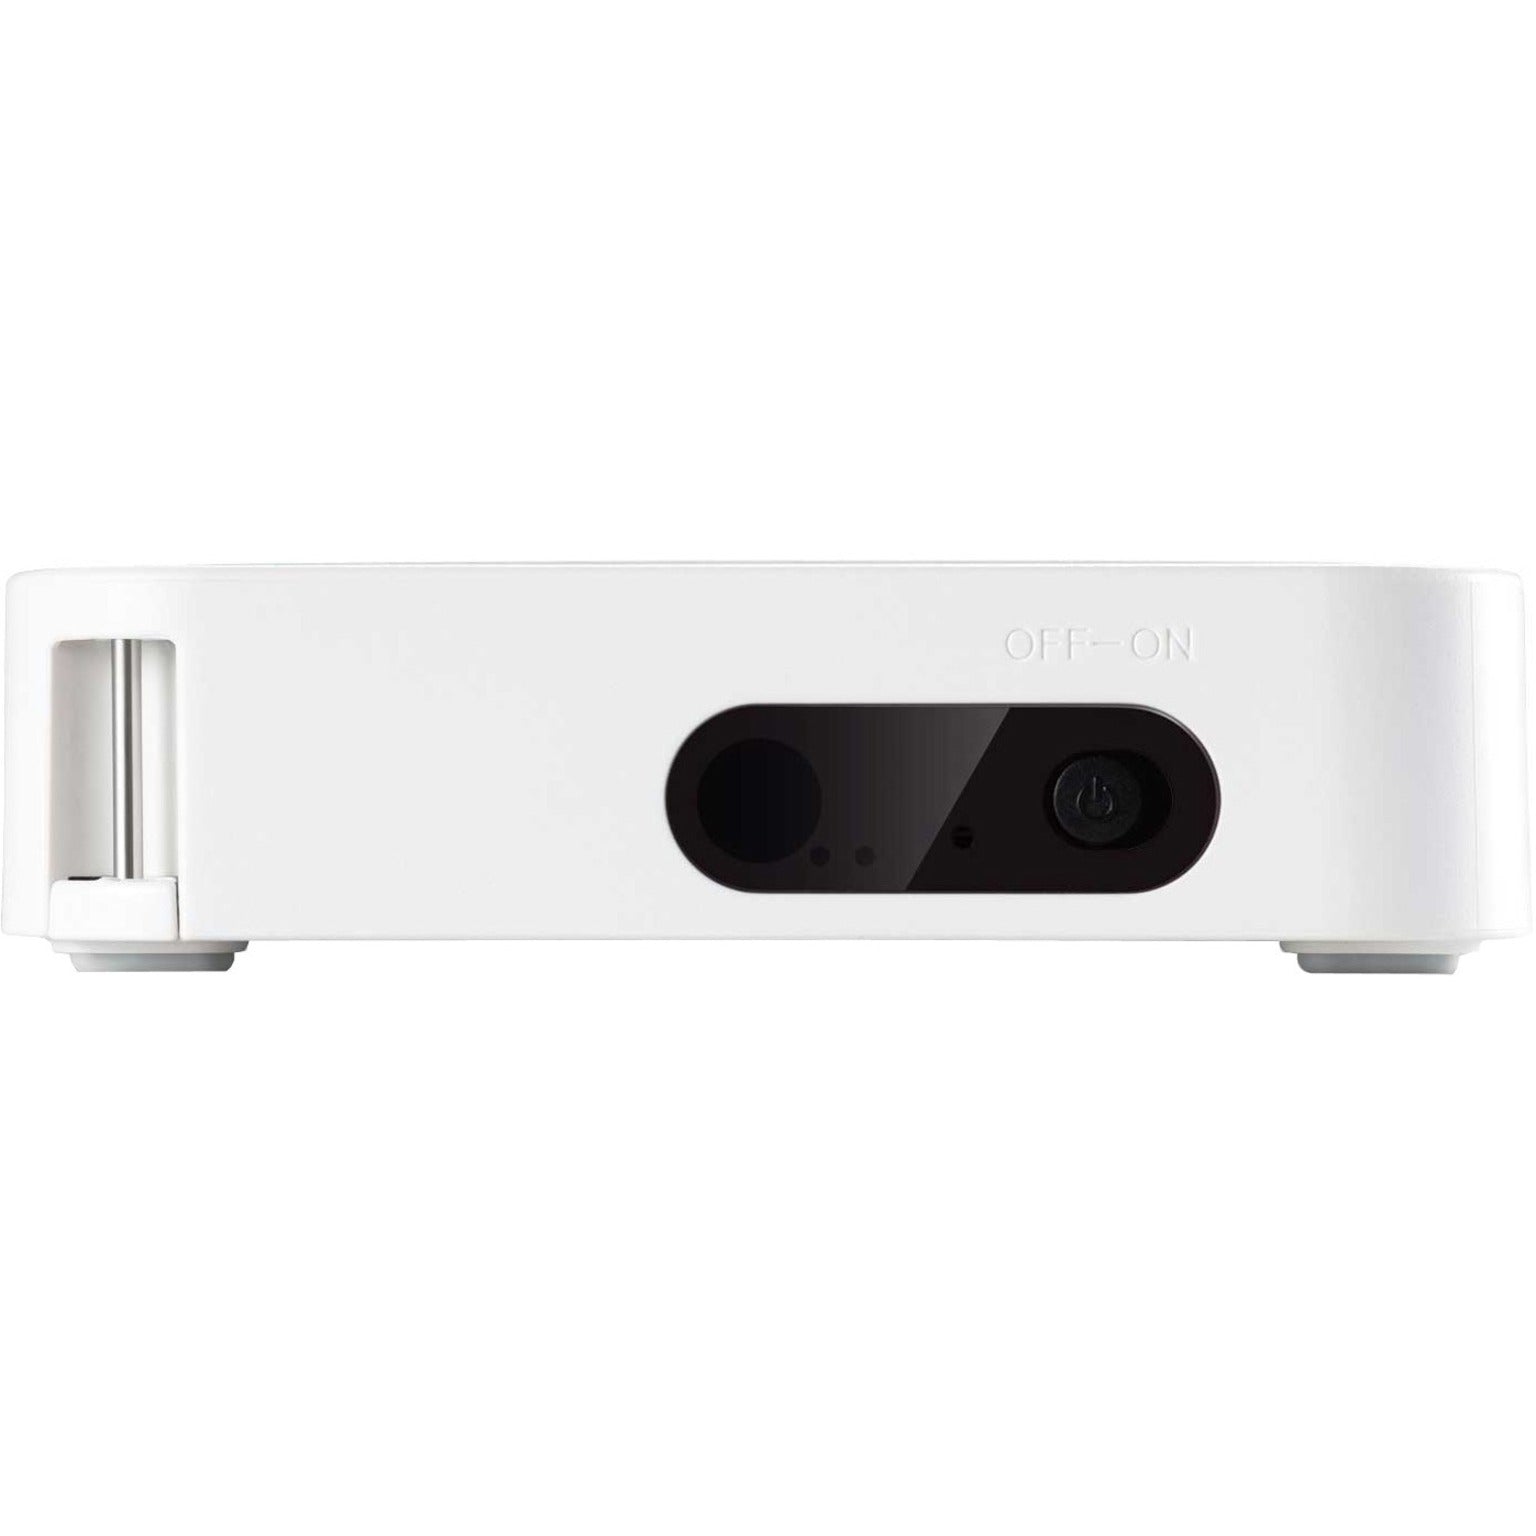 Ultra Portable LED Projector with JBL Speaker, HDMI and USB (M1MINI) Rear image